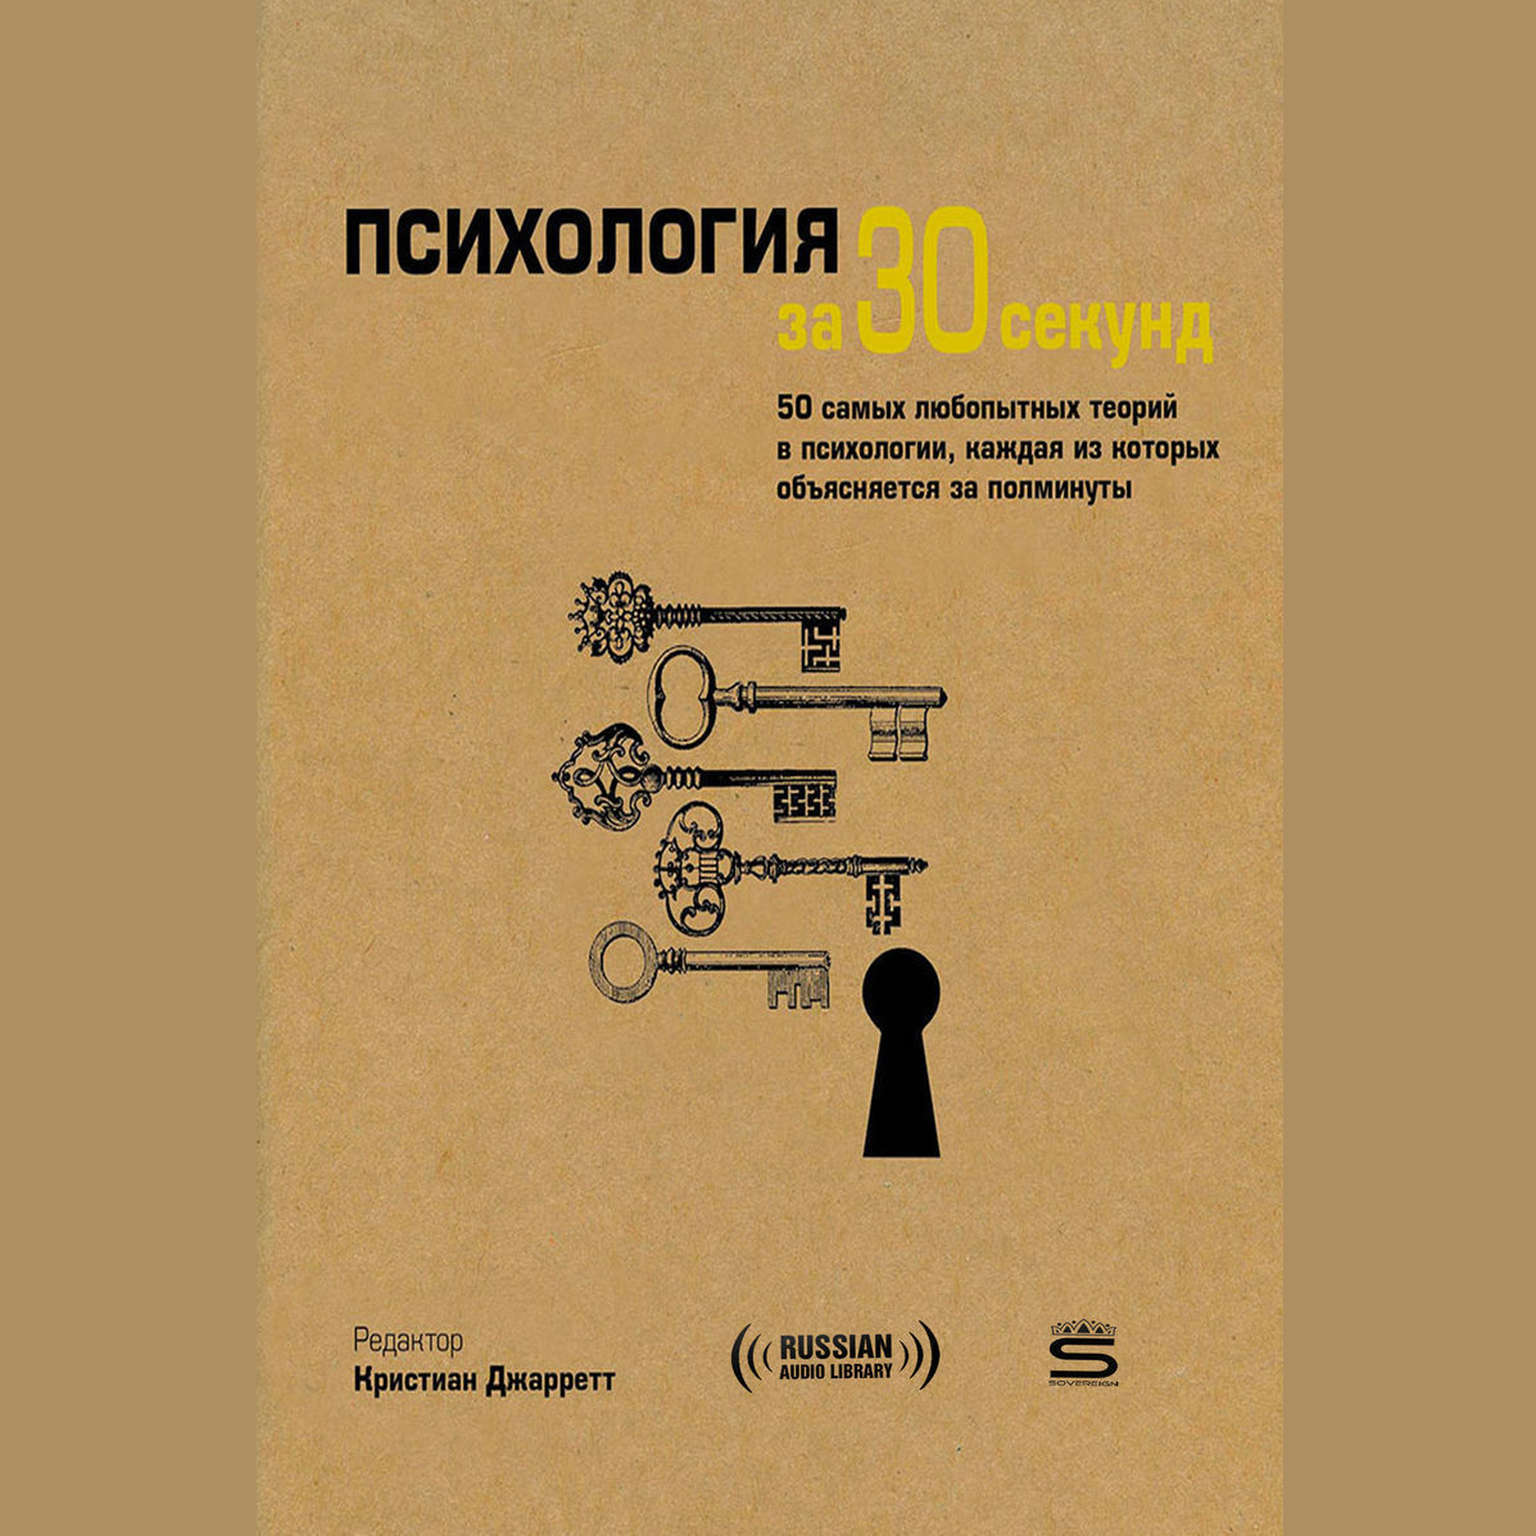 Психология за 30 секунд: The 50 Most Thought-provoking Psychology Theories, Each Explained in Half a Minute [Russian Edition] Audiobook, by Кристиан Джарретт